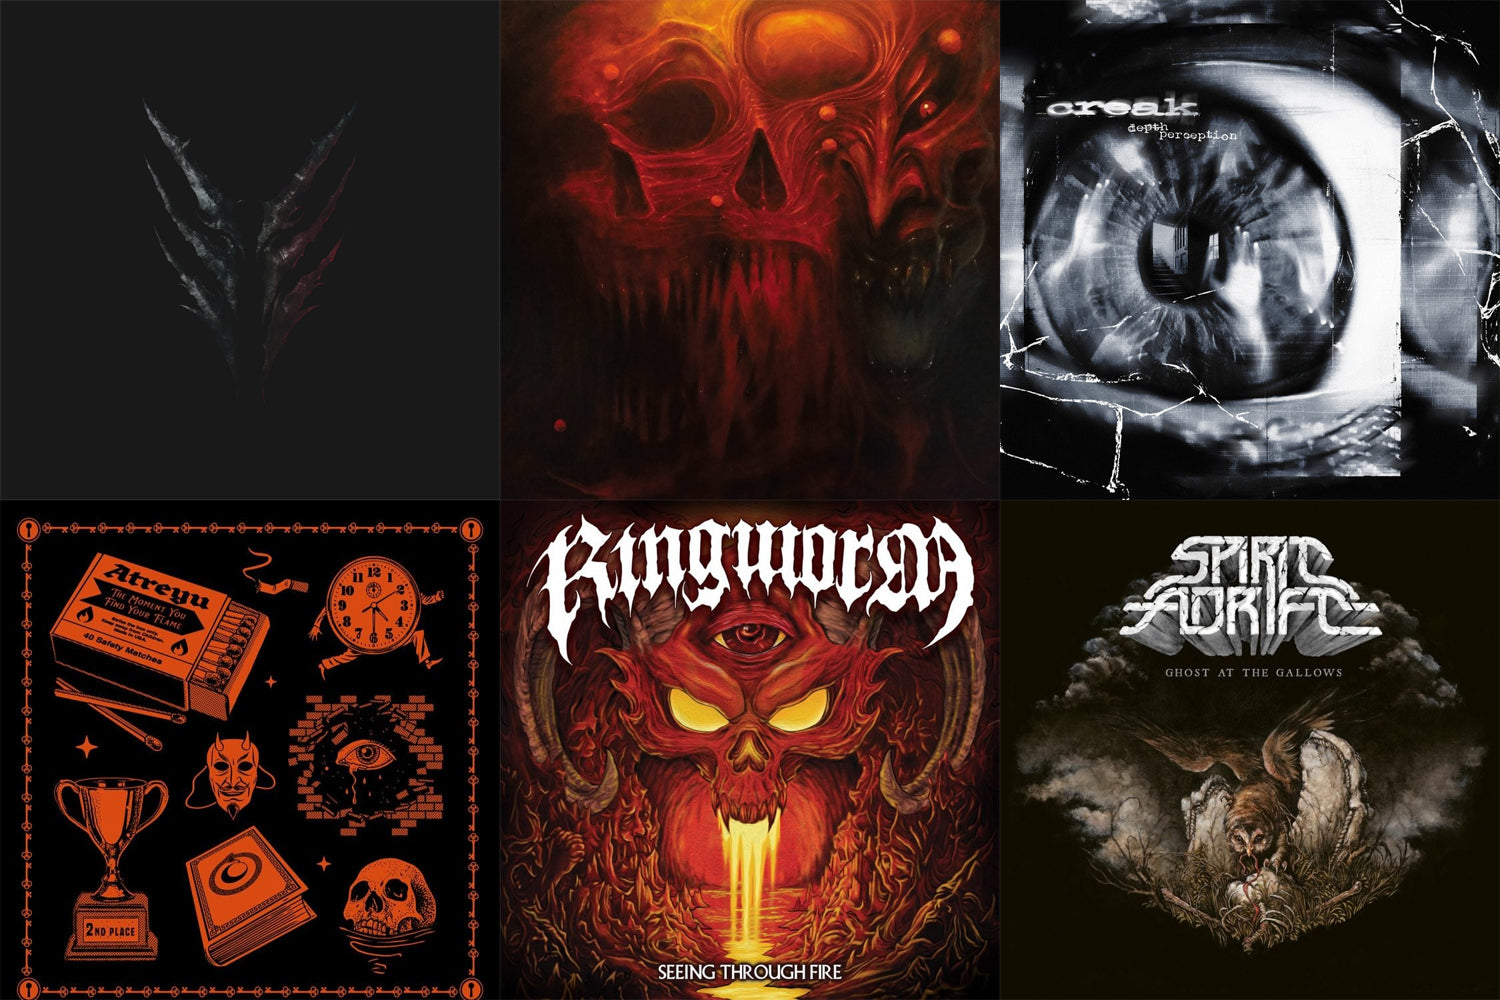 NEW FLESH 8/18: RELEASES FROM ORBIT CULTURE, HORRENDOUS, ATREYU AND MORE!